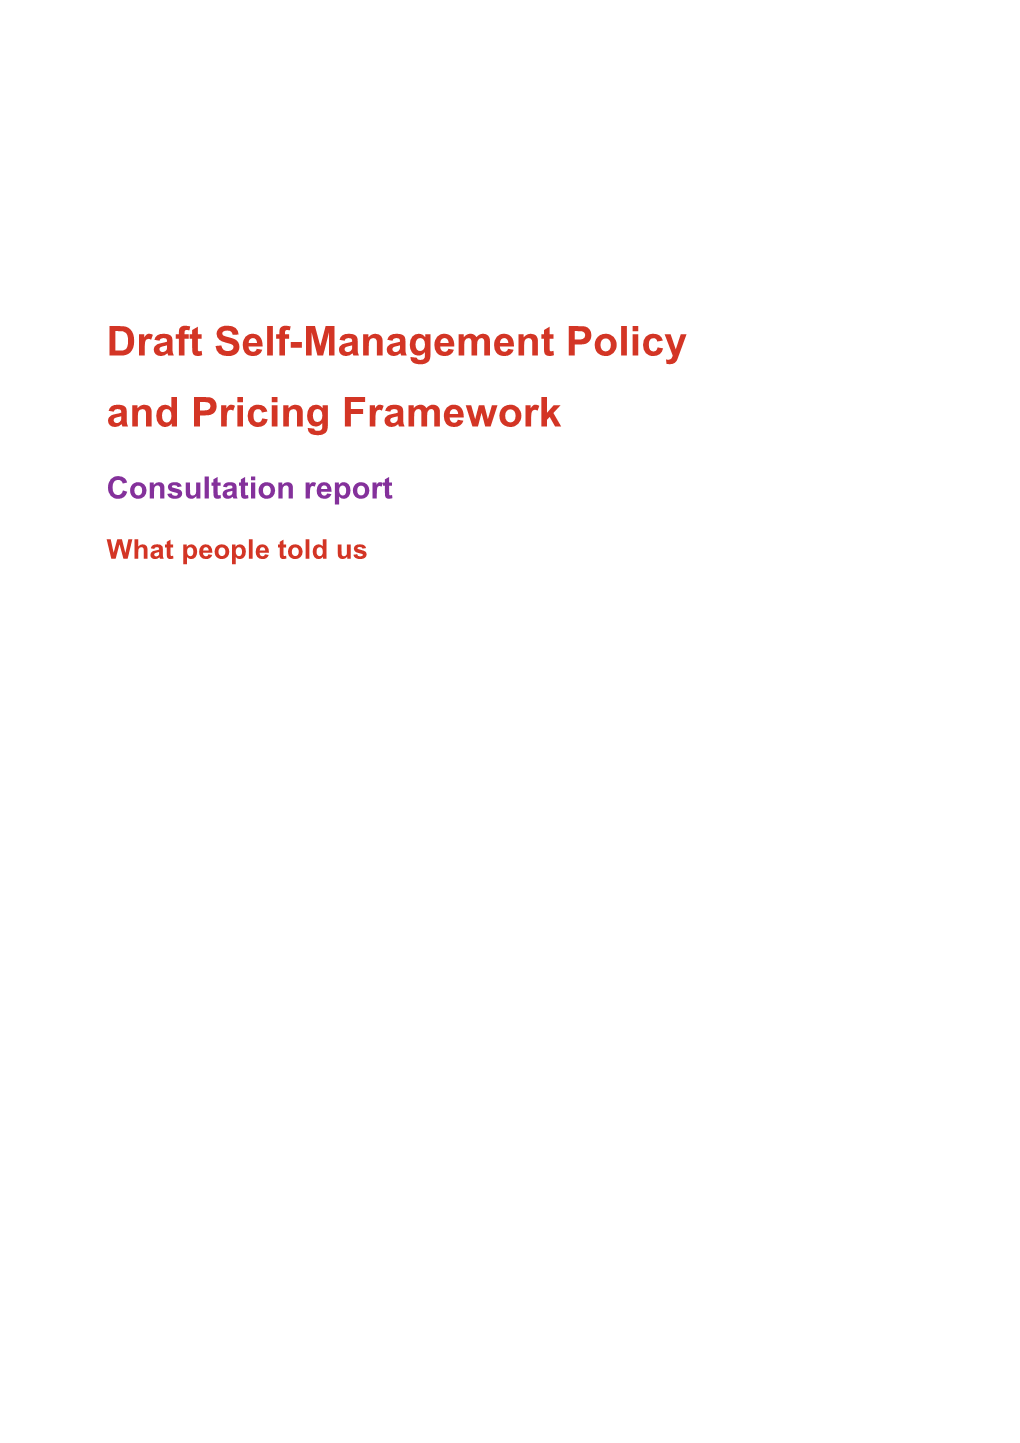 Draft Self-Management Policy - Consultation Report - Easy Read